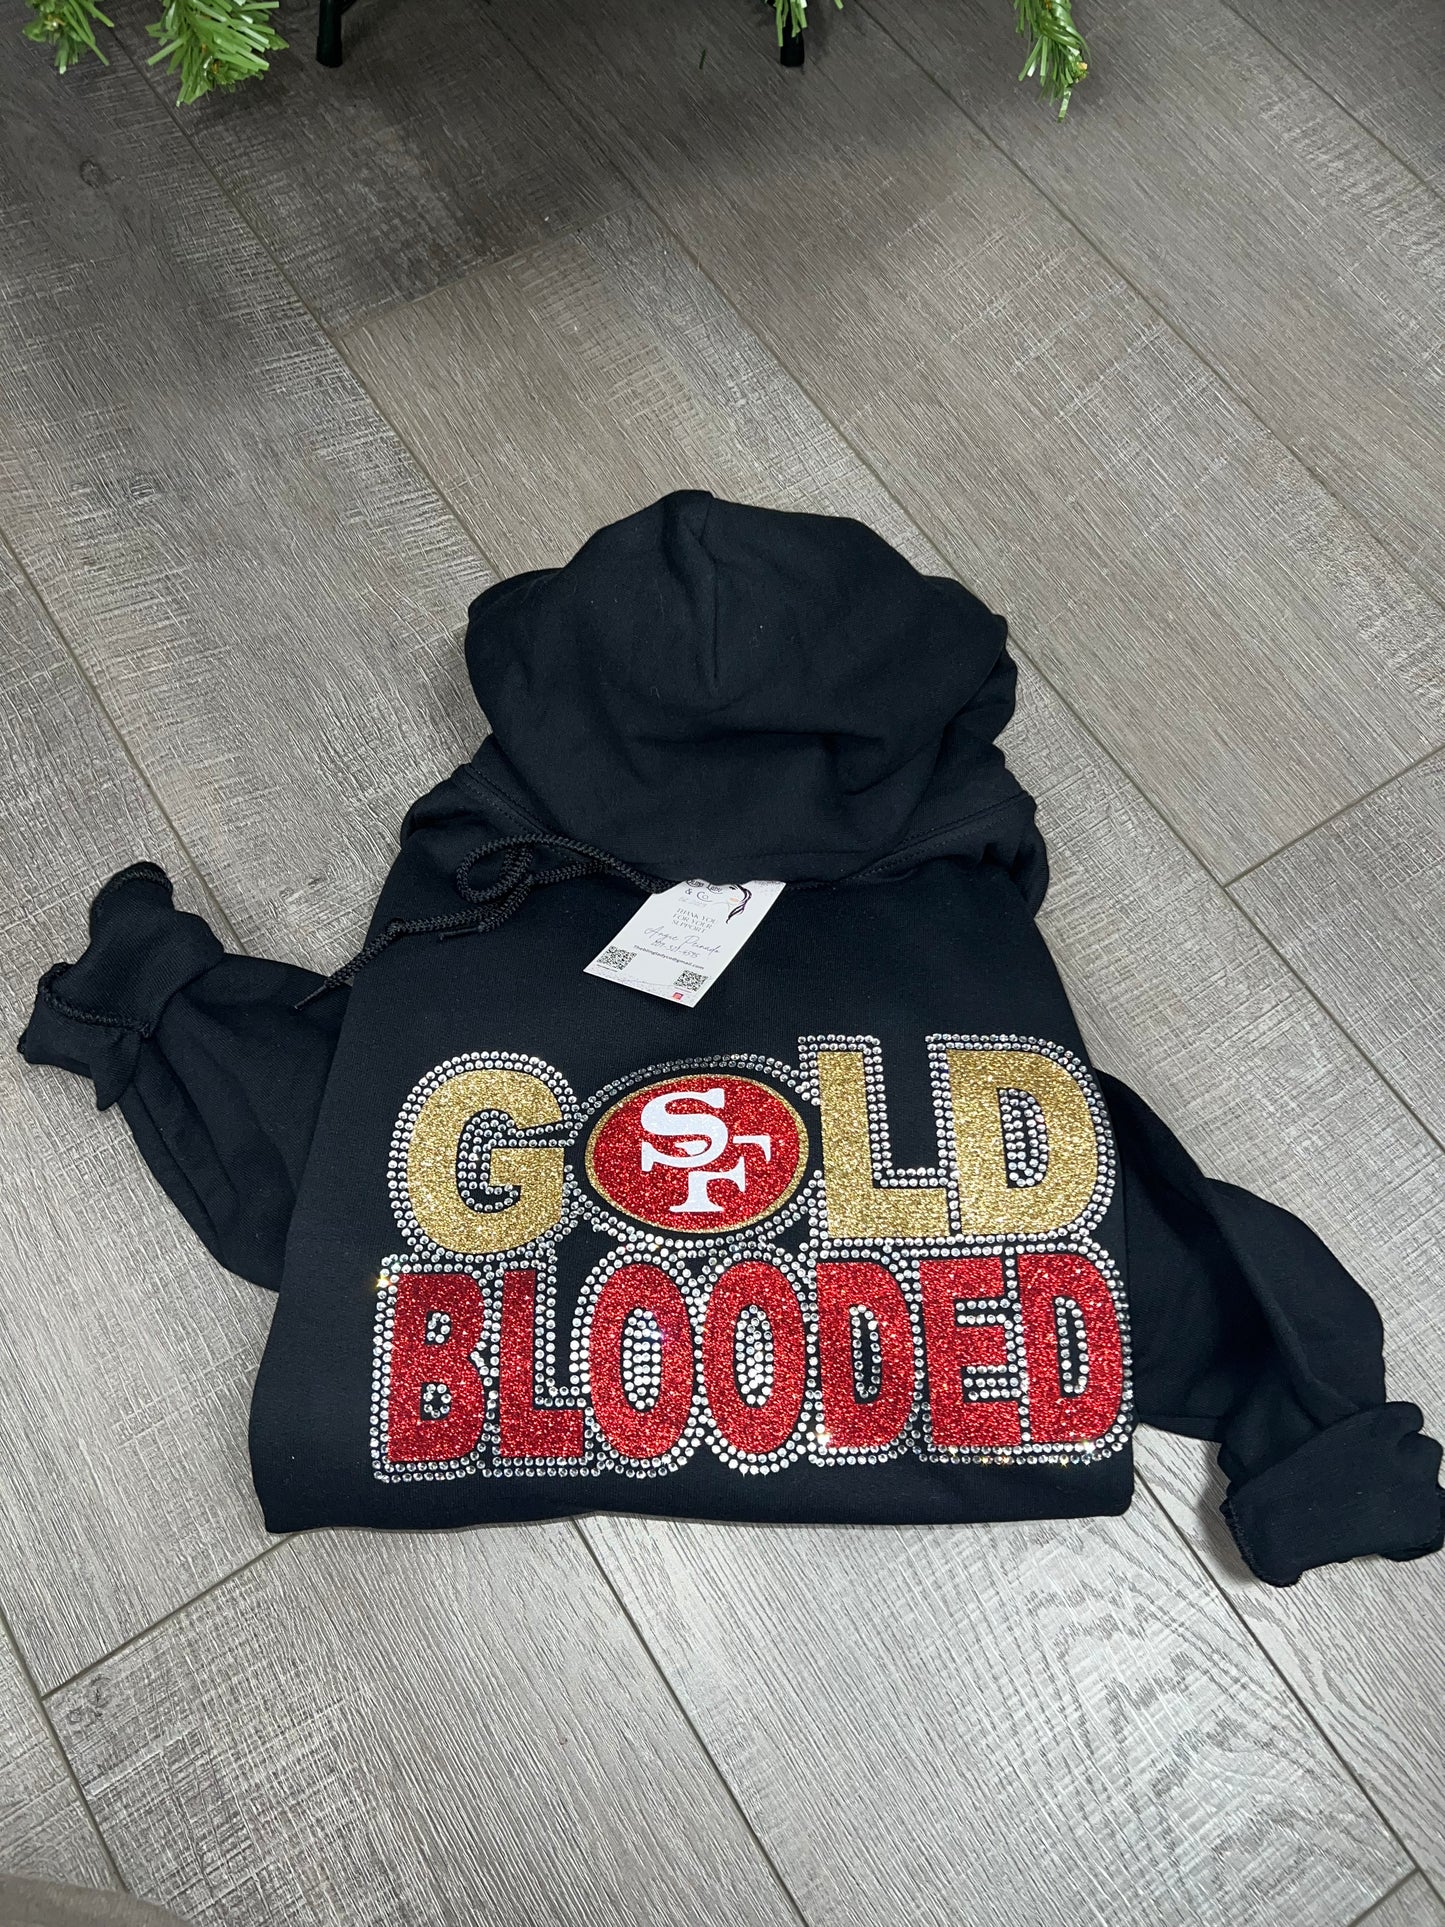 Gold blooded Bling hoodie